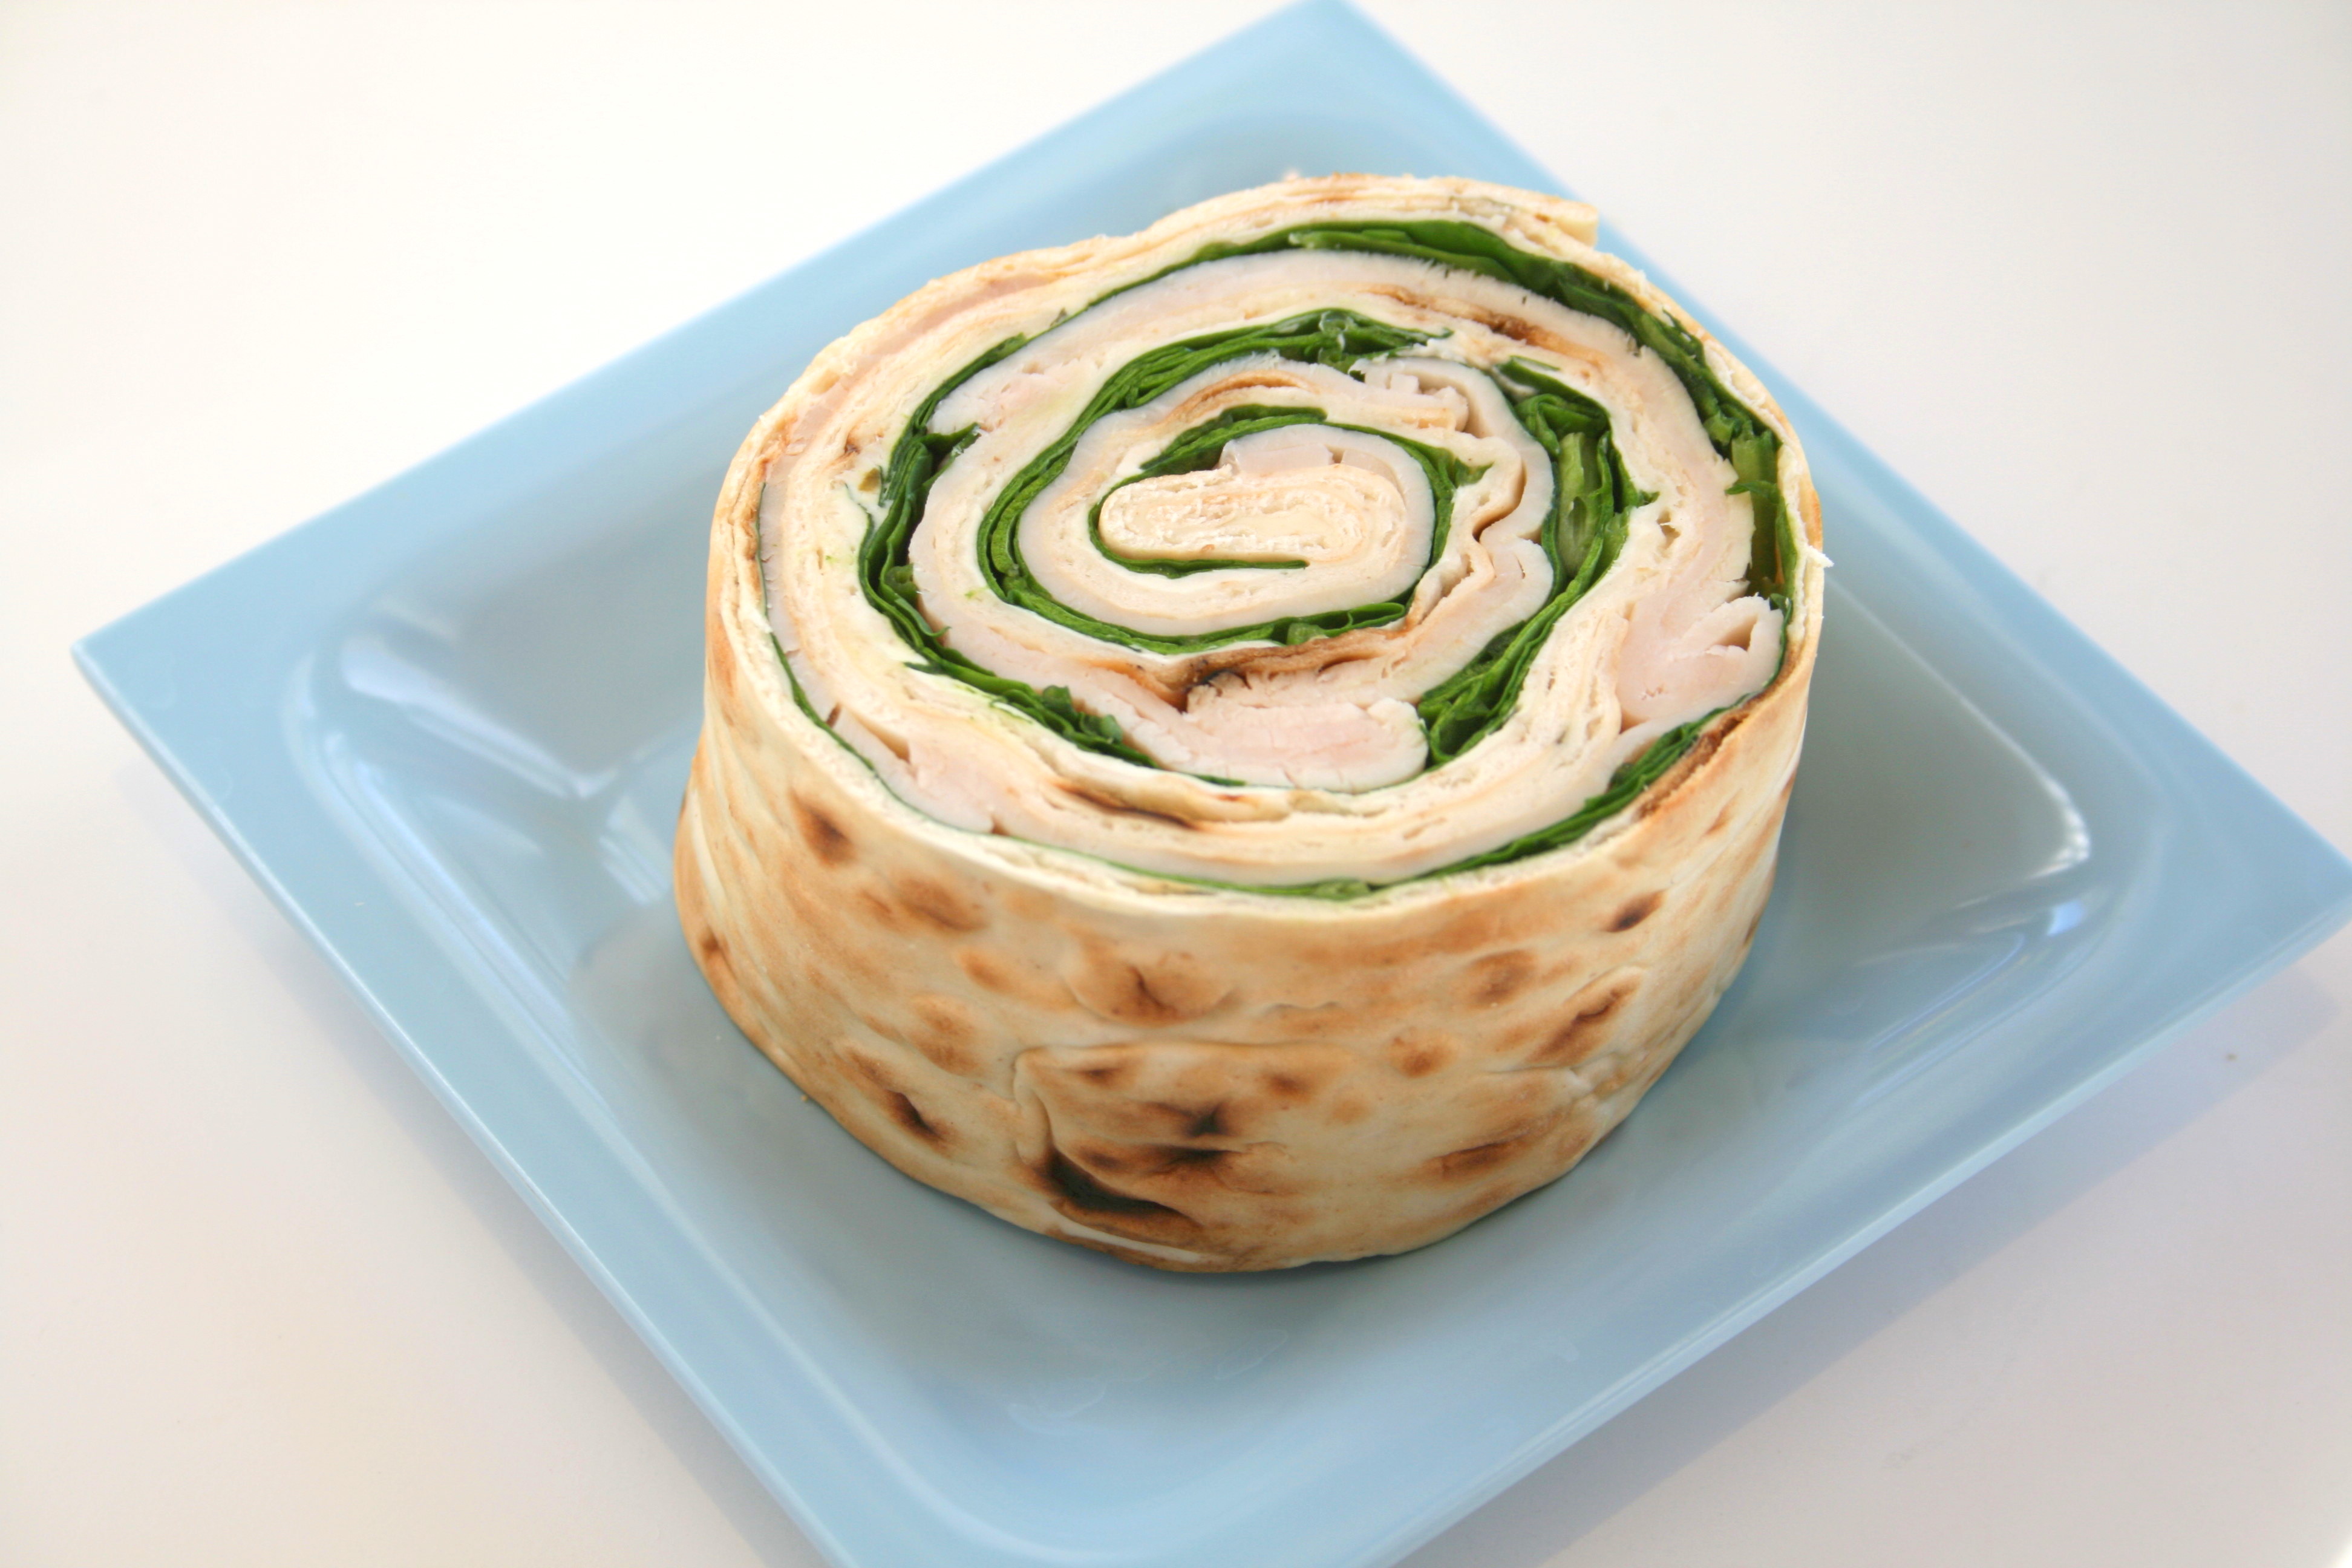 Turkey Pinwheel Sandwich with Spinach and Boursin sandwich on a blue plate